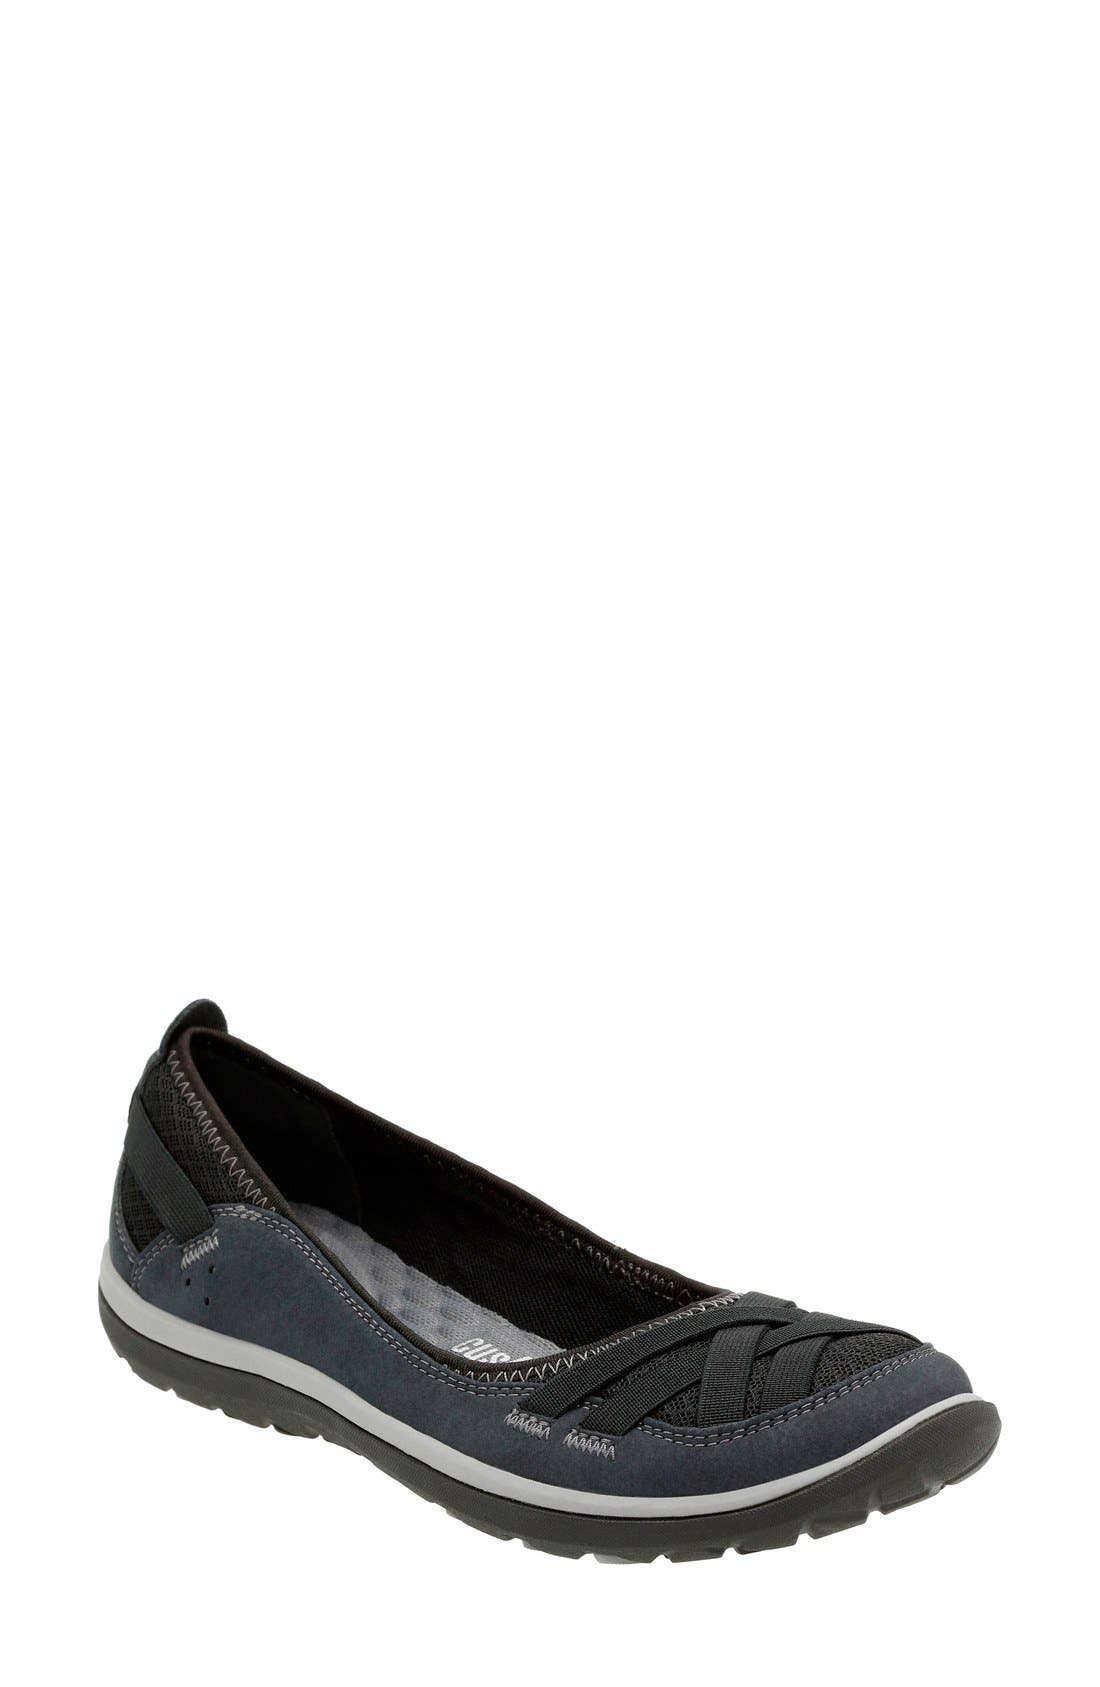 nordstrom rack clarks womens shoes